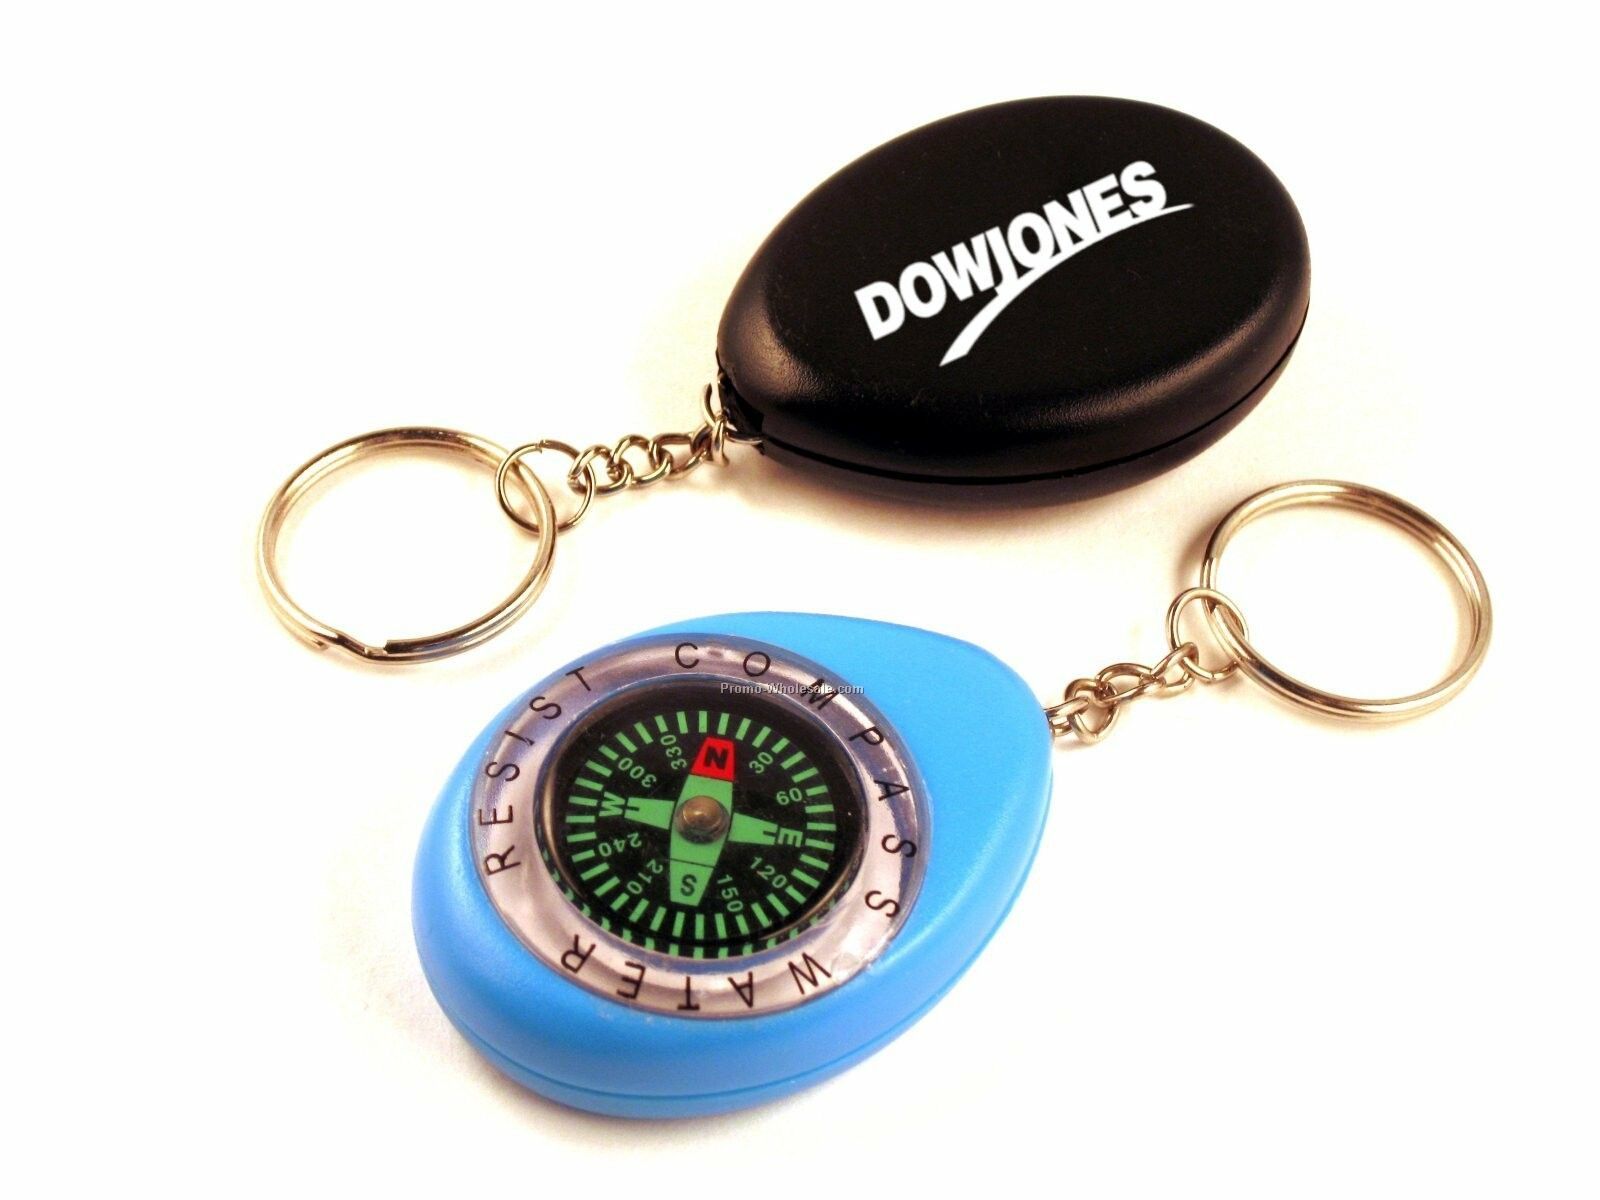 Water Resistant Compass With Key Chain